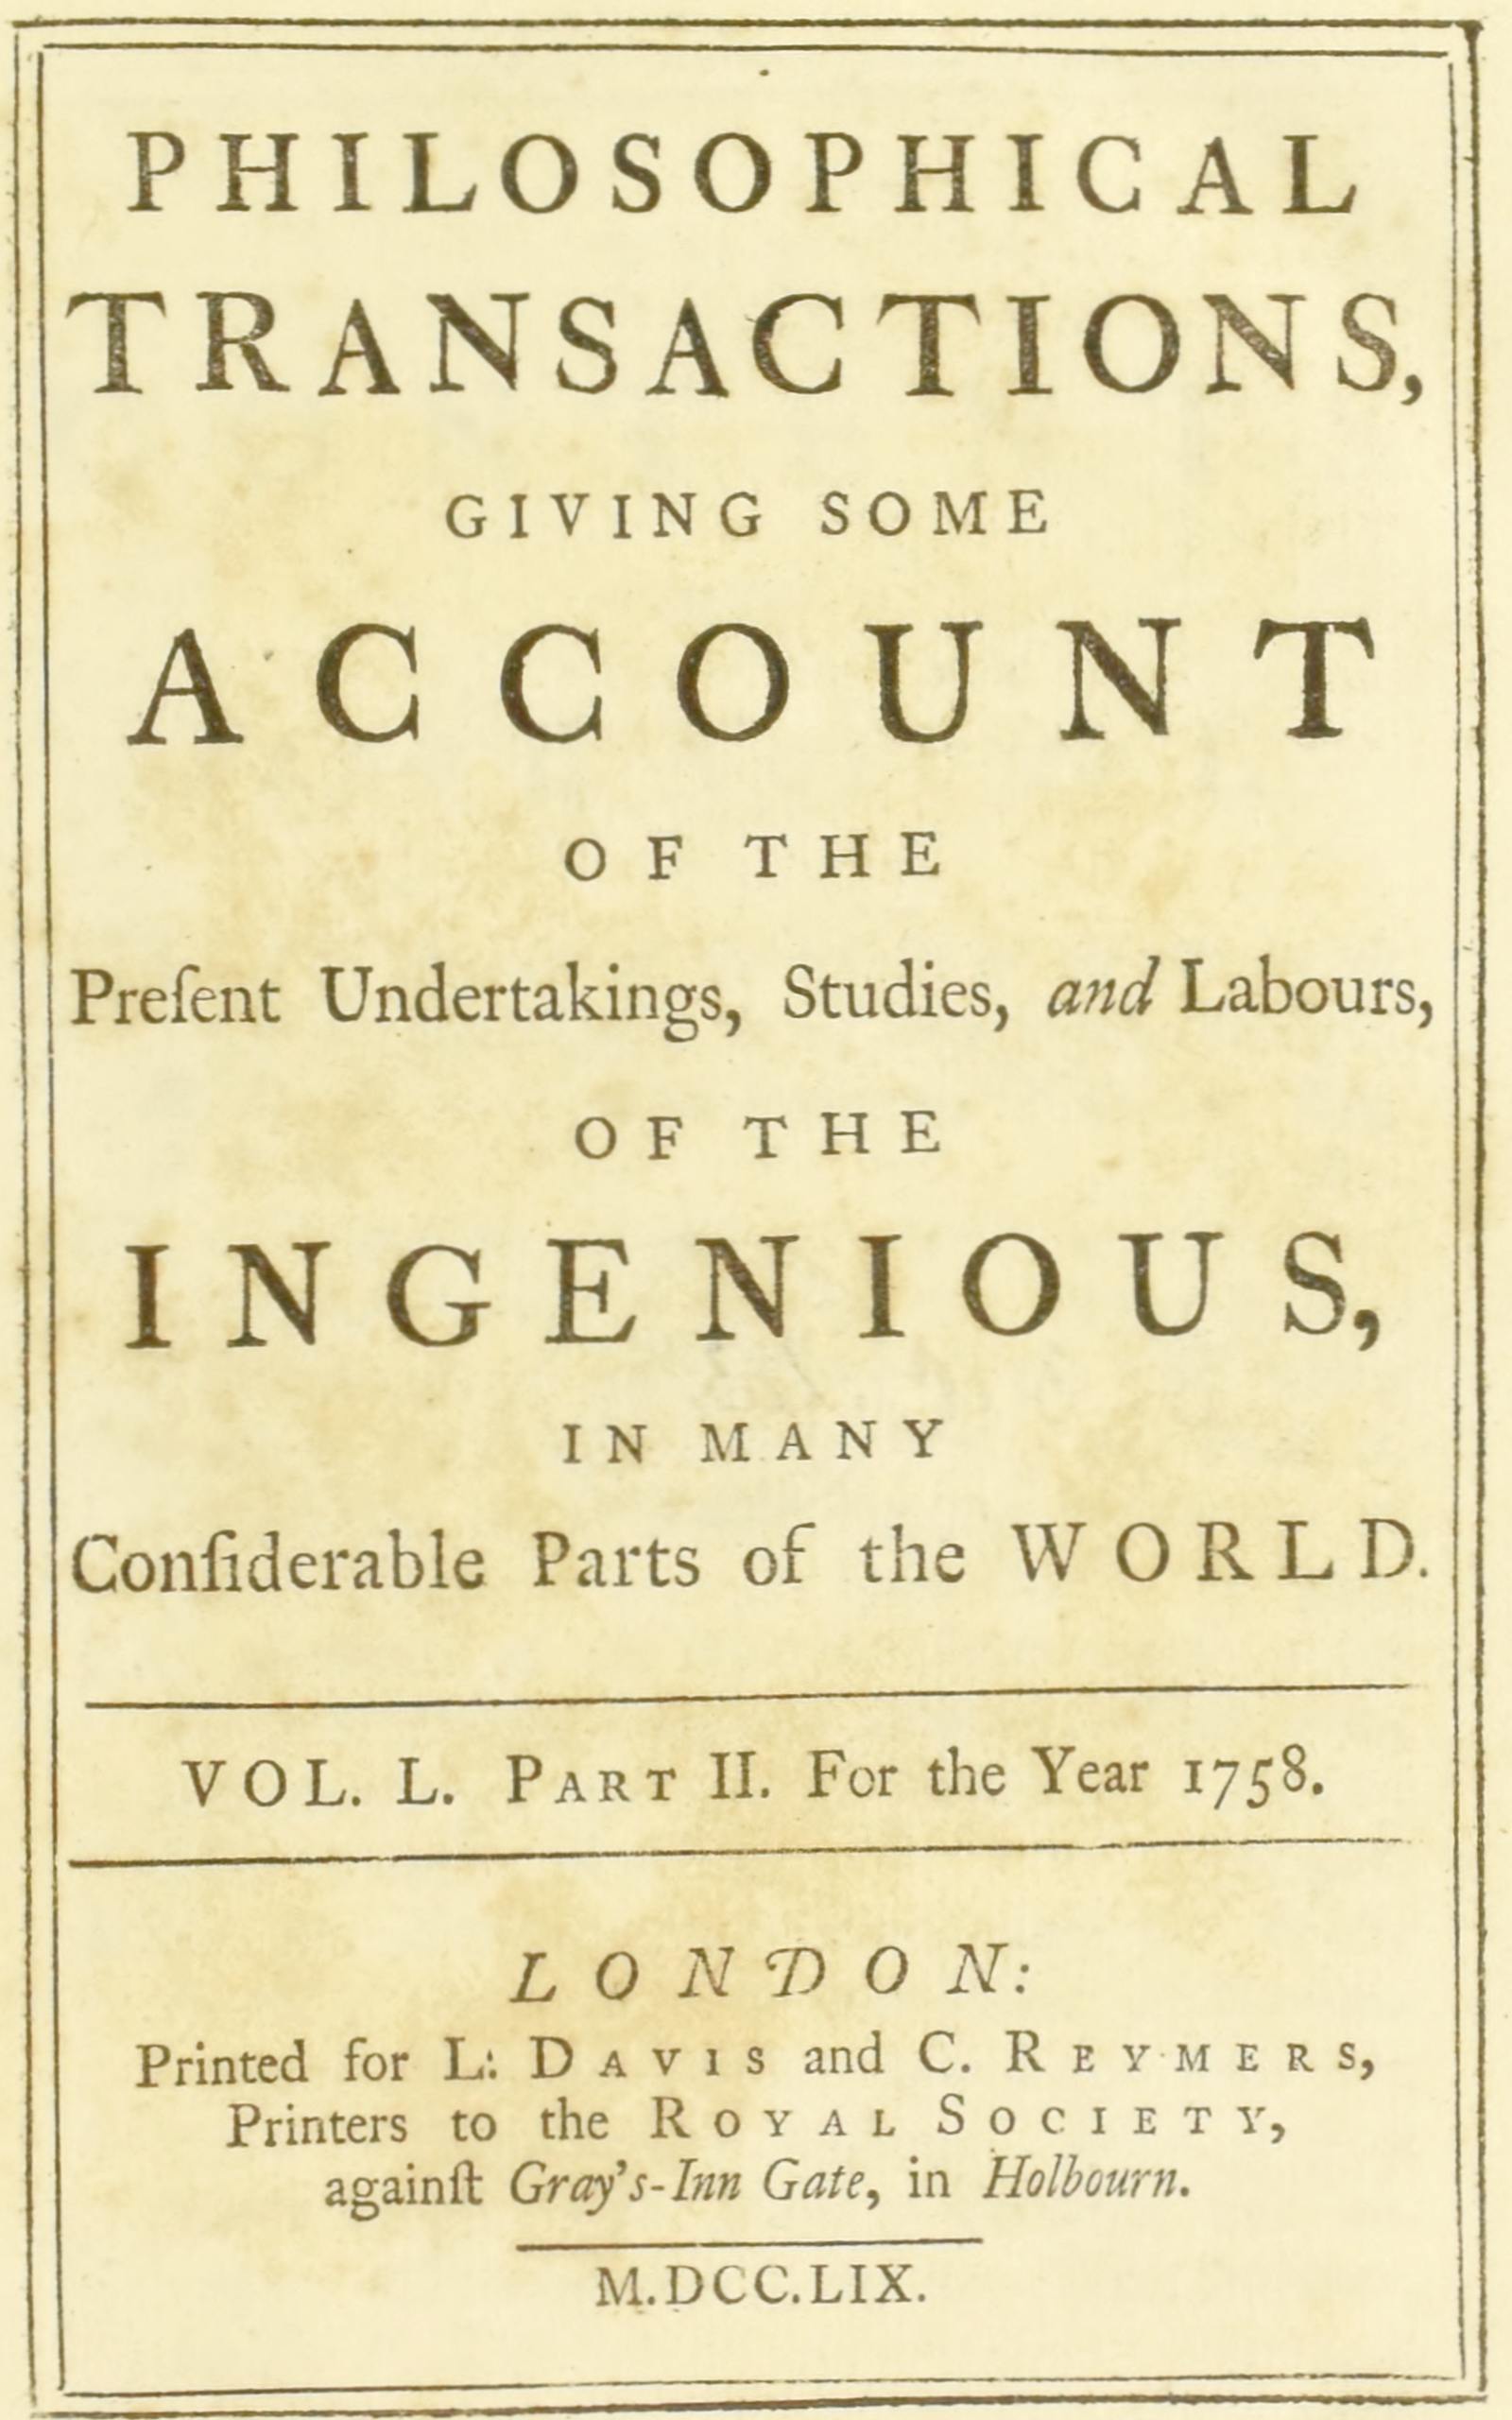 Philosophical transactions, Vol. L. Part II. For the year 1758.&#10;Giving some account of the present undertakings, studies, and labours, of the ingenious, in many considerable parts of the world.